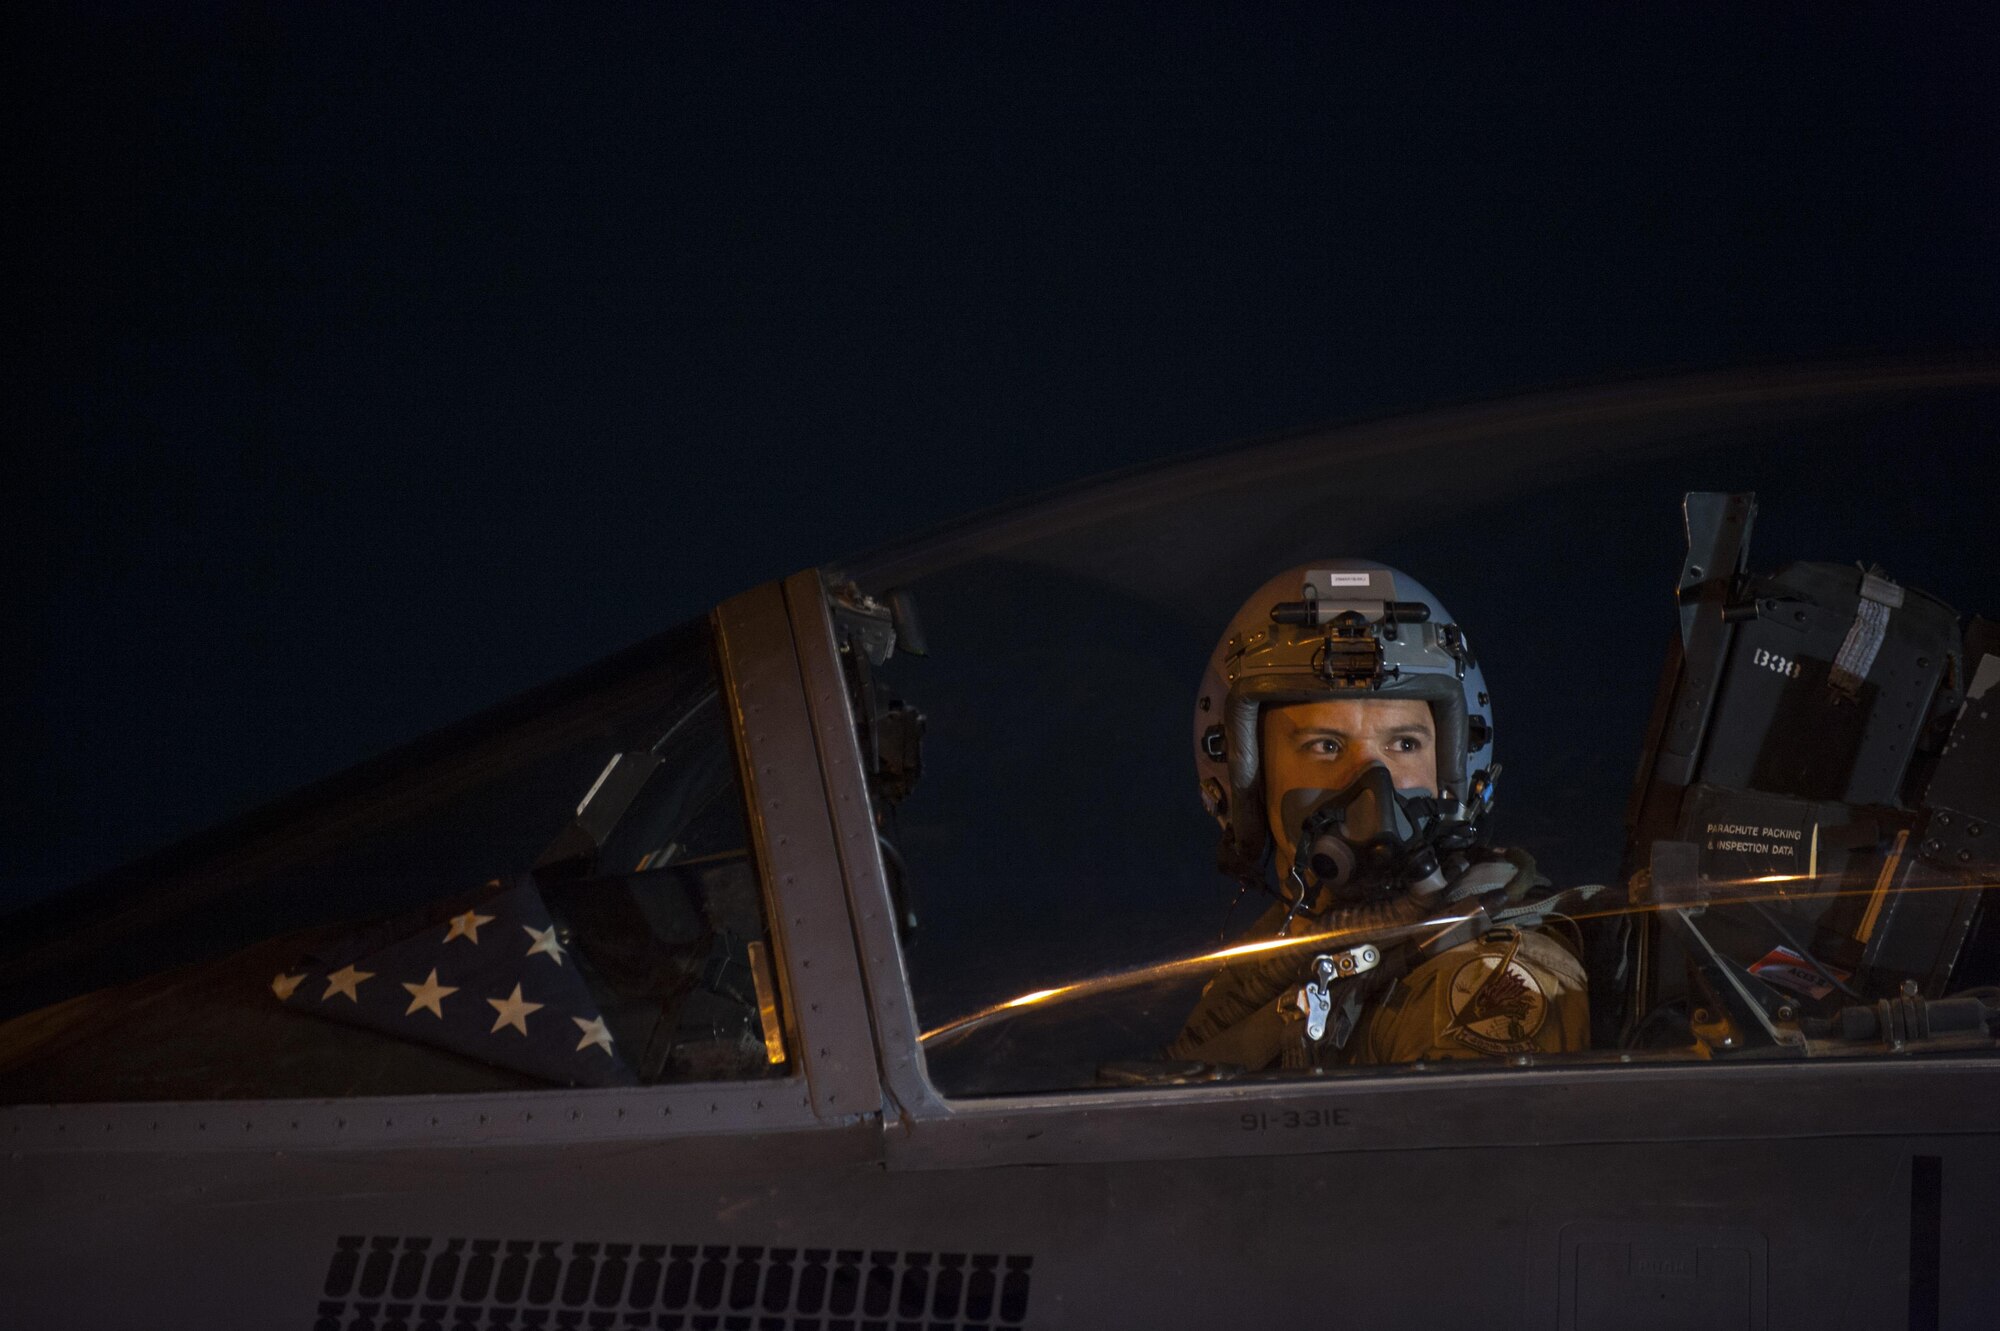 A pilot assigned to the 492nd Expeditionary Fighter Squadron readies his F-15E Strike Eagle for an early-morning takeoff October 4, 2017, at an undisclosed location in Southwest Asia. During their time in the region, the 492nd EFS performed devastating ground attacks on Islamic State fighters, equipment, and economic assets, playing a crucial role in the group’s continuing loss of influence in the area.